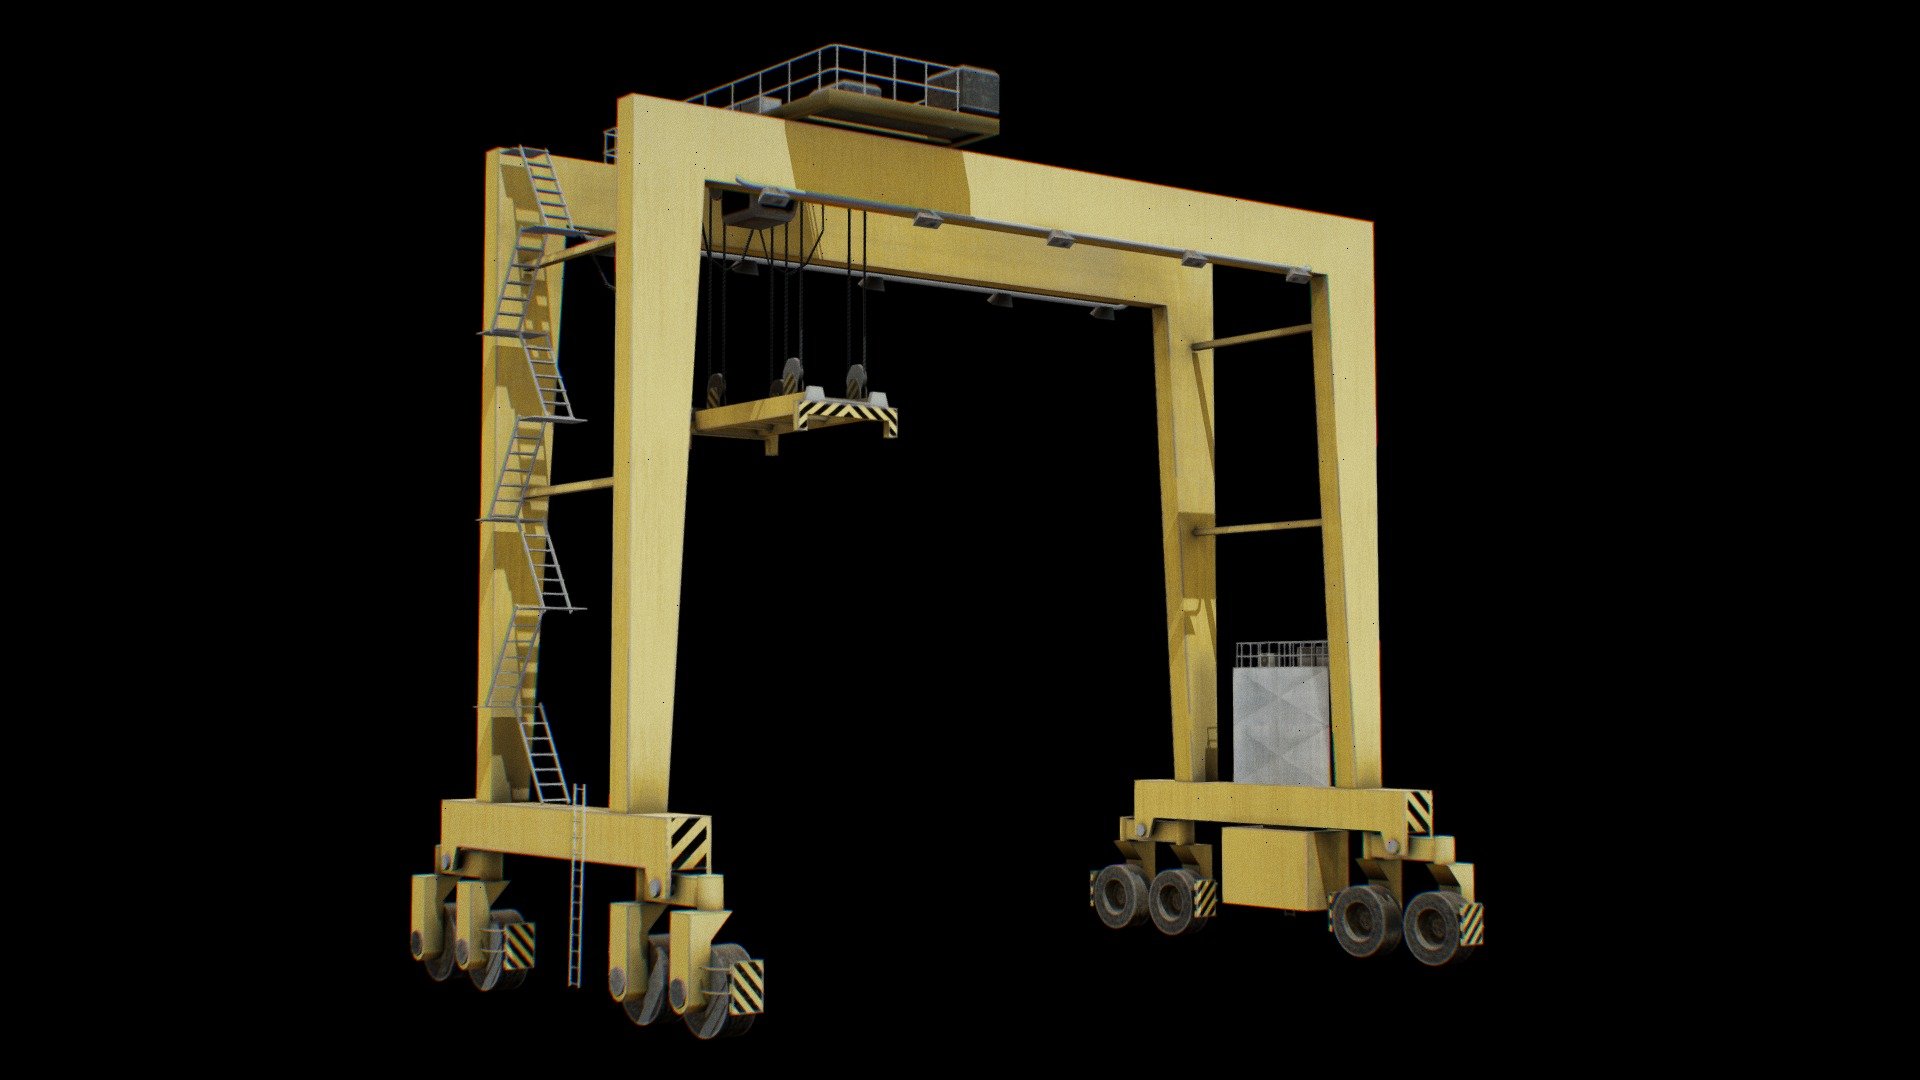 RTG Port Crane 3D Model was created with the highest quality standard:




Clear topology has quads and tris grid only

There are no N-gons, Non-Manifold geometry or Doubles vertices

The model origin has zero transform position at the center of the scene

The model has clear UV map and applied material

Includes 2048x2048 .png PBR textures

Textures and maps included: Basecolor, Normal, Roughness, Metalness, Displacement, Specular, Glossiness
*

All scales of 3D objects are close to the real object's scales

No plugins used or needed to open or use this model

All parts of the model have clear names

The model is ready for rigging and animation

All-Purpose 2.79 and 4.0.2 Blender files included (Can be opened in any blender software)

Other file formats included: .Blend (Original 2.79 and 3.4.1), .Max(2010), .Mb(2014), .C4D(R26), .3Ds, .abc, .dae, .fbx (All-Purpose), .obj (All-Purpose), .stl, ,ply, .x3d, .glb, .usdc;

Thanks for choosing our products and best regards! - RTG Port Crane - Buy Royalty Free 3D model by Cordy 3d model